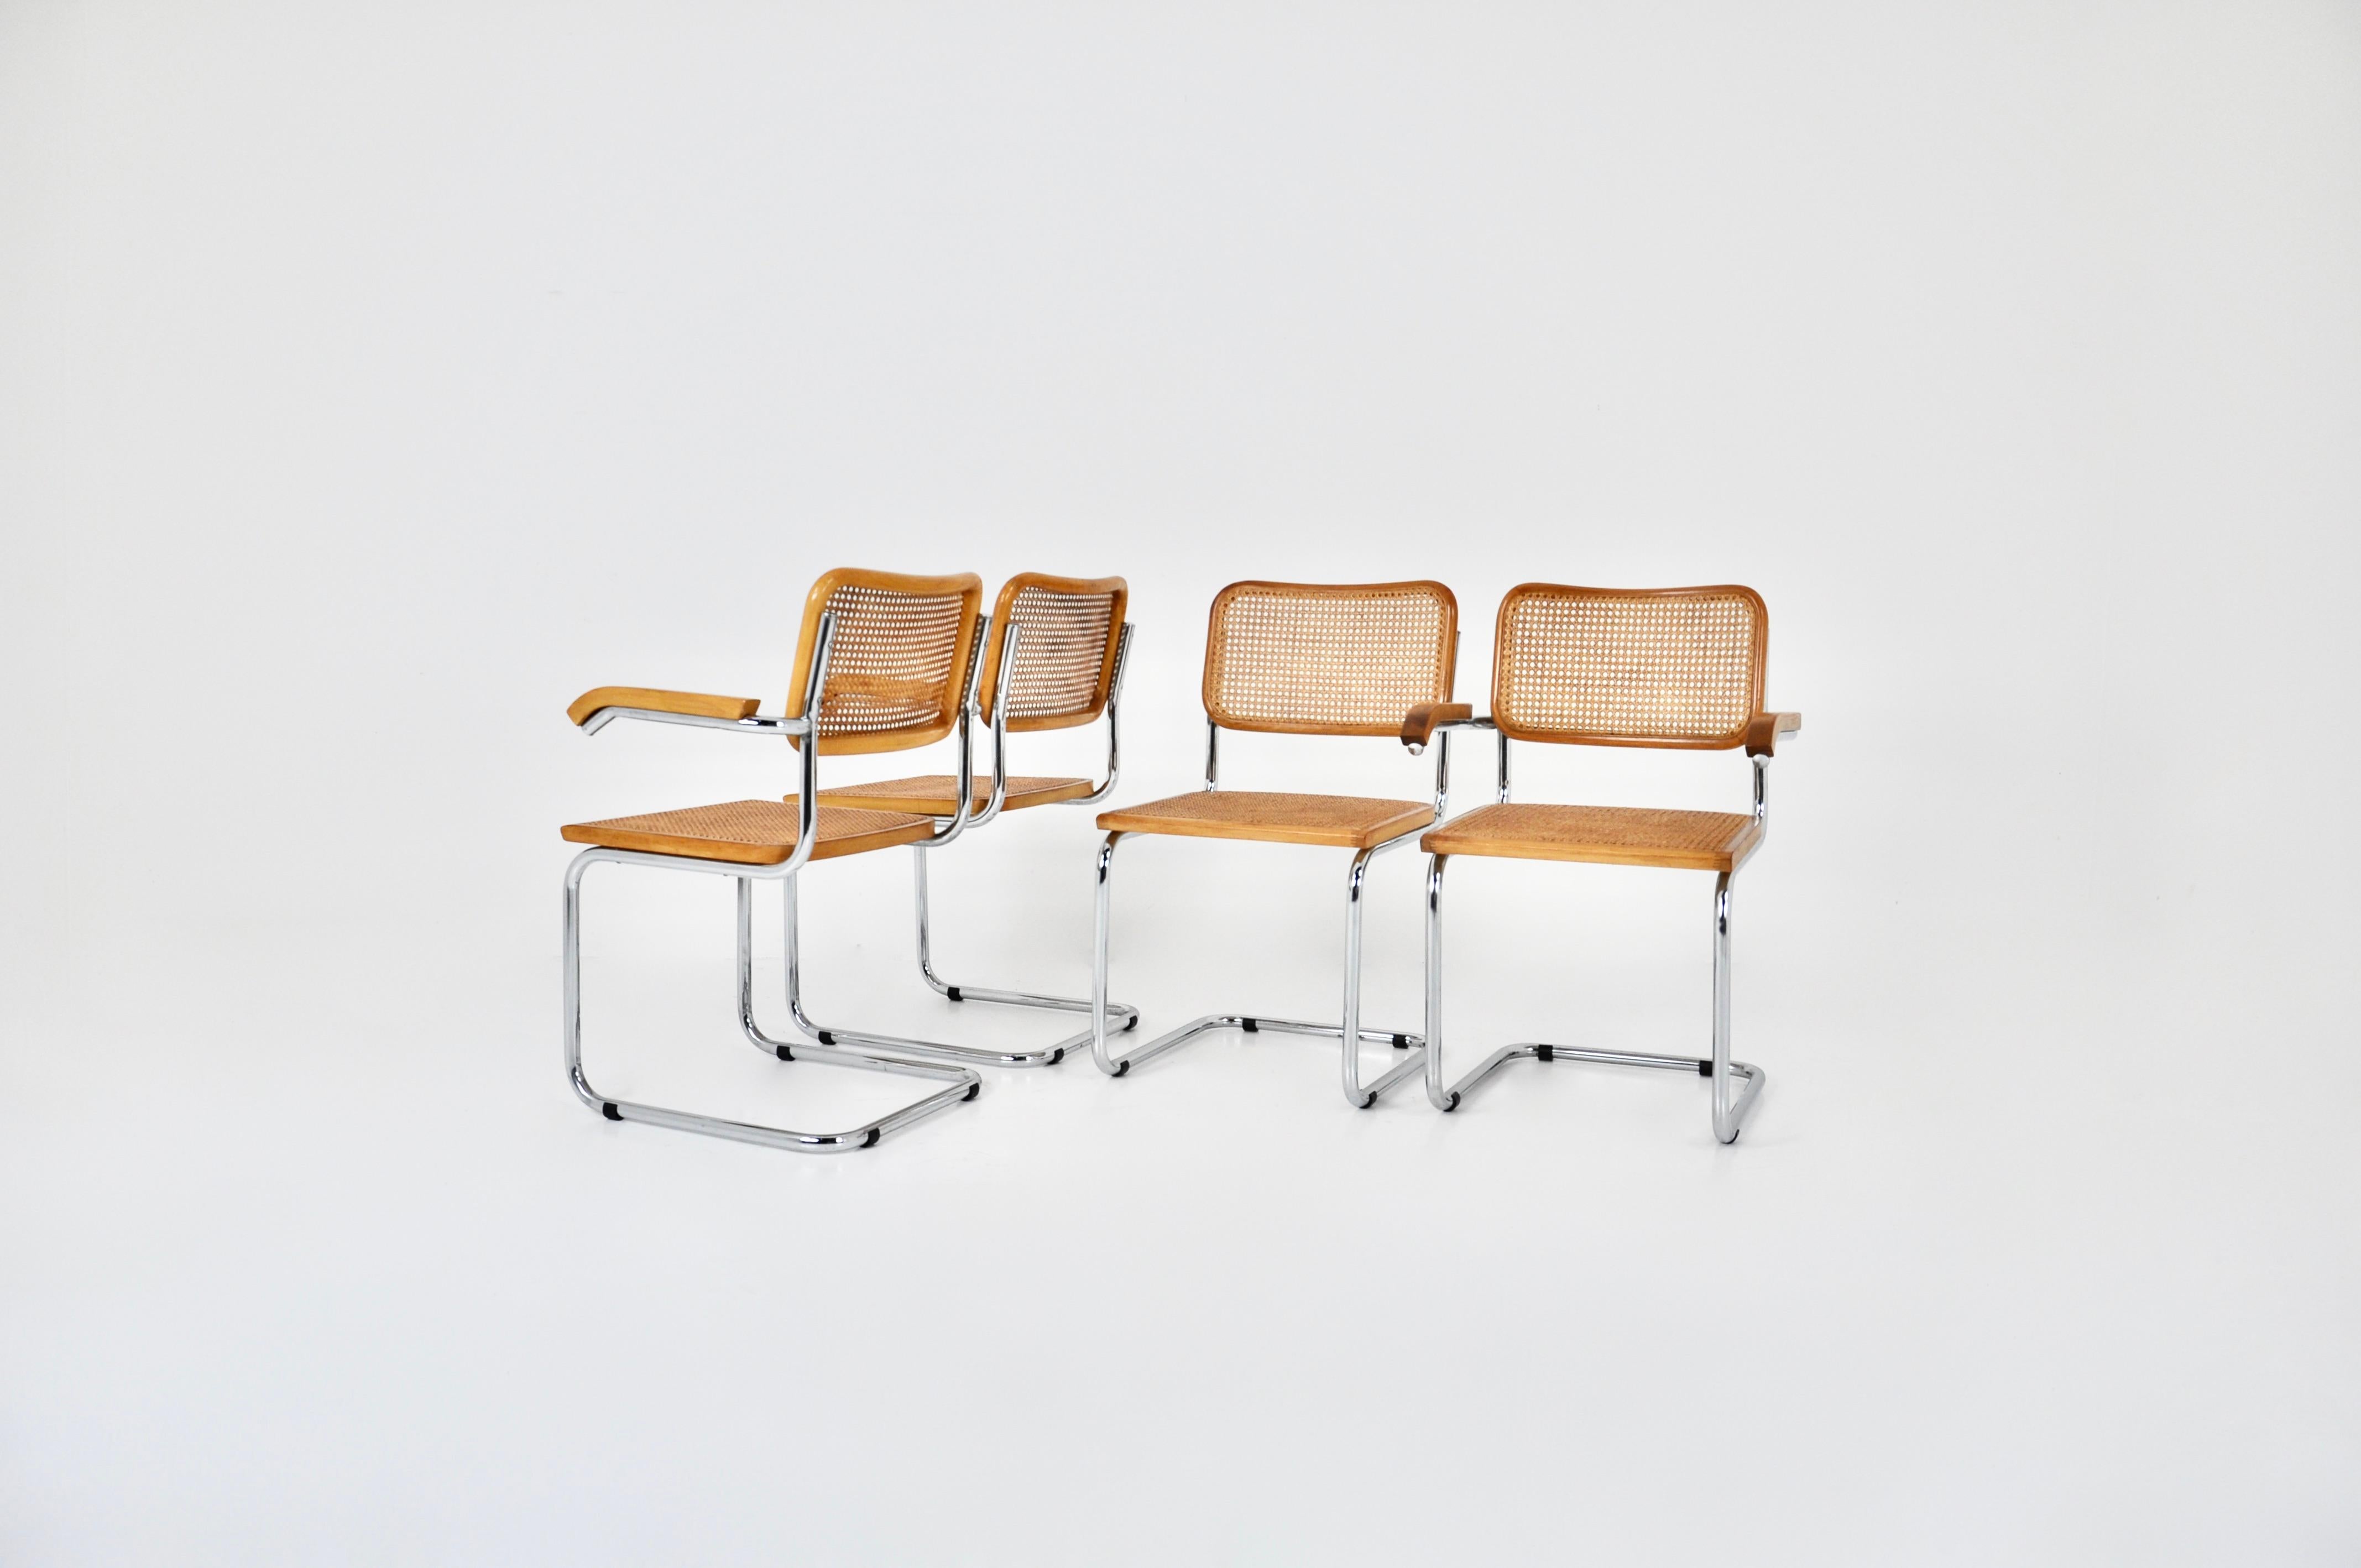 Set of 4 chairs in metal, wood and rattan. 2 with arms and 2 without arms. 
Dimensions: seat height: 45 cm. Width with armrests :58  cm 
Wear due to time and age of the chairs. 


